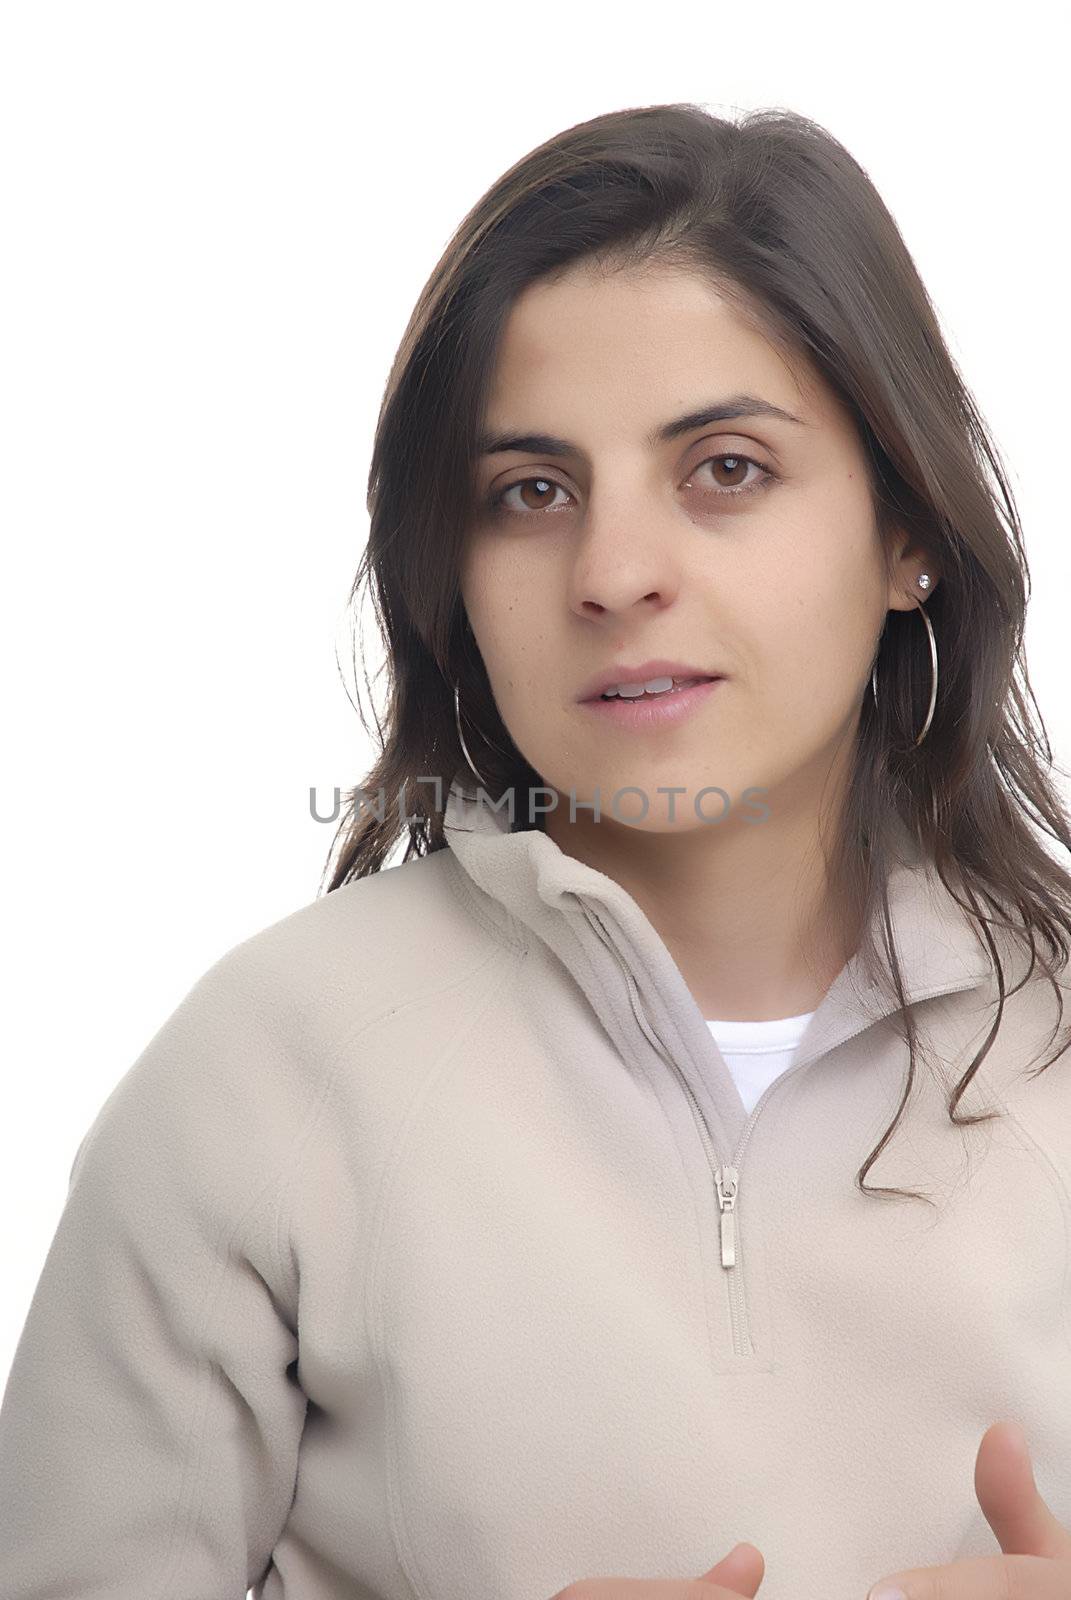 young casual woman portrait in a white background